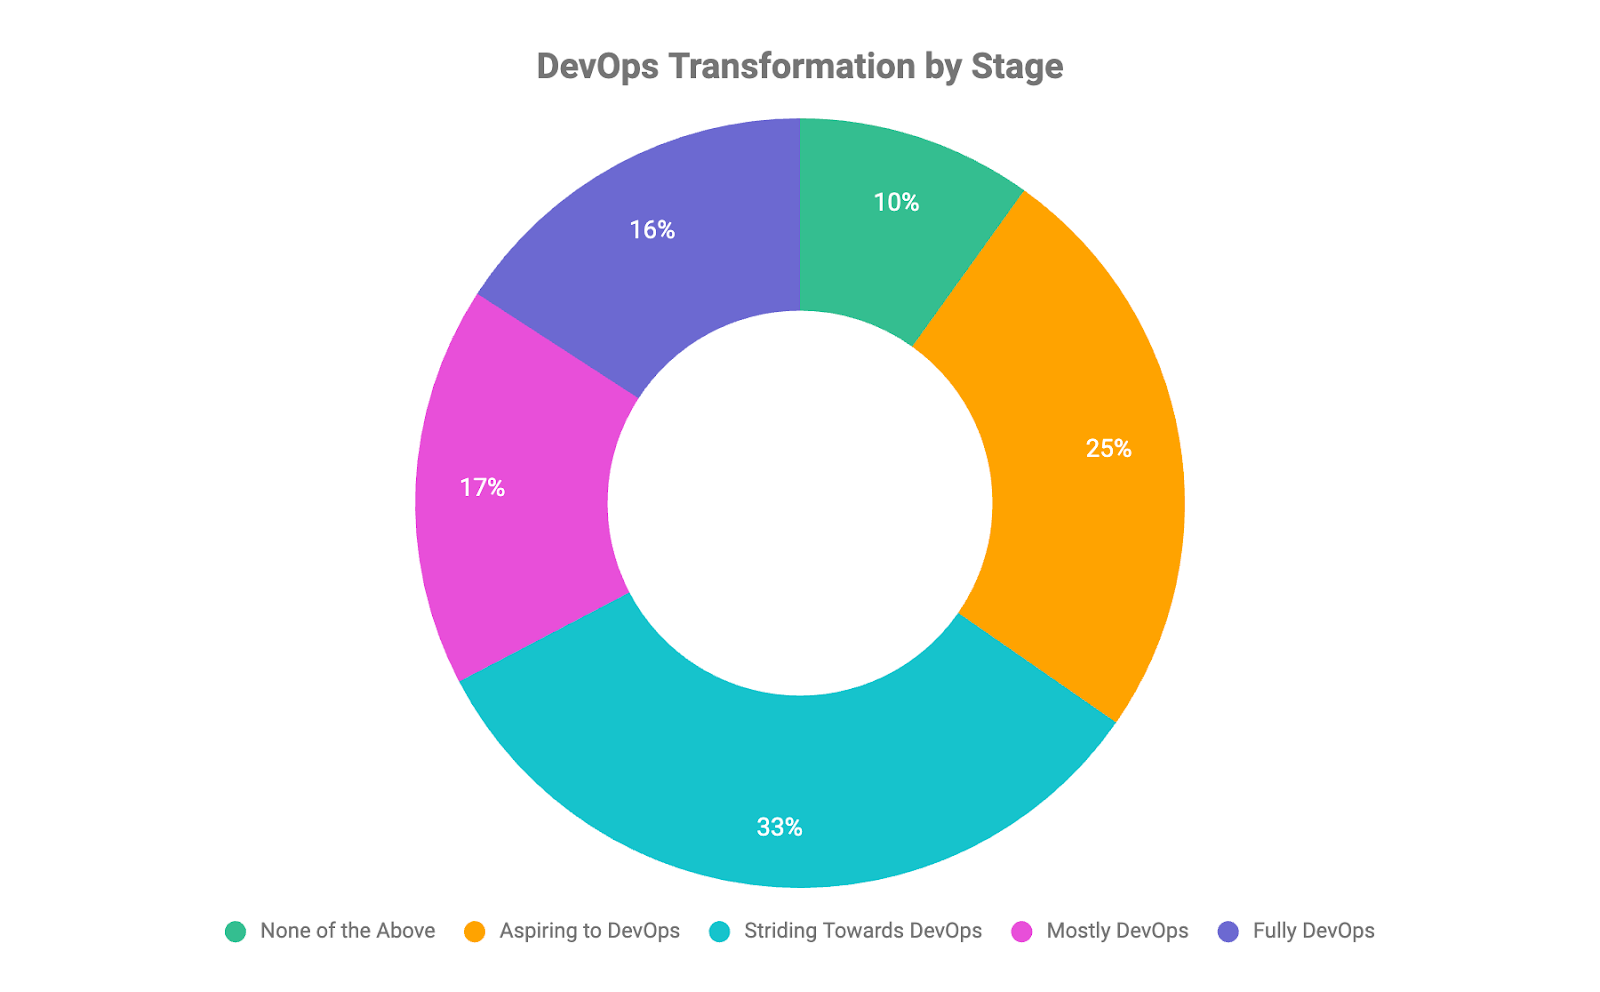 Pie chart showing the proportion of companies in each stage of DevOps adoption